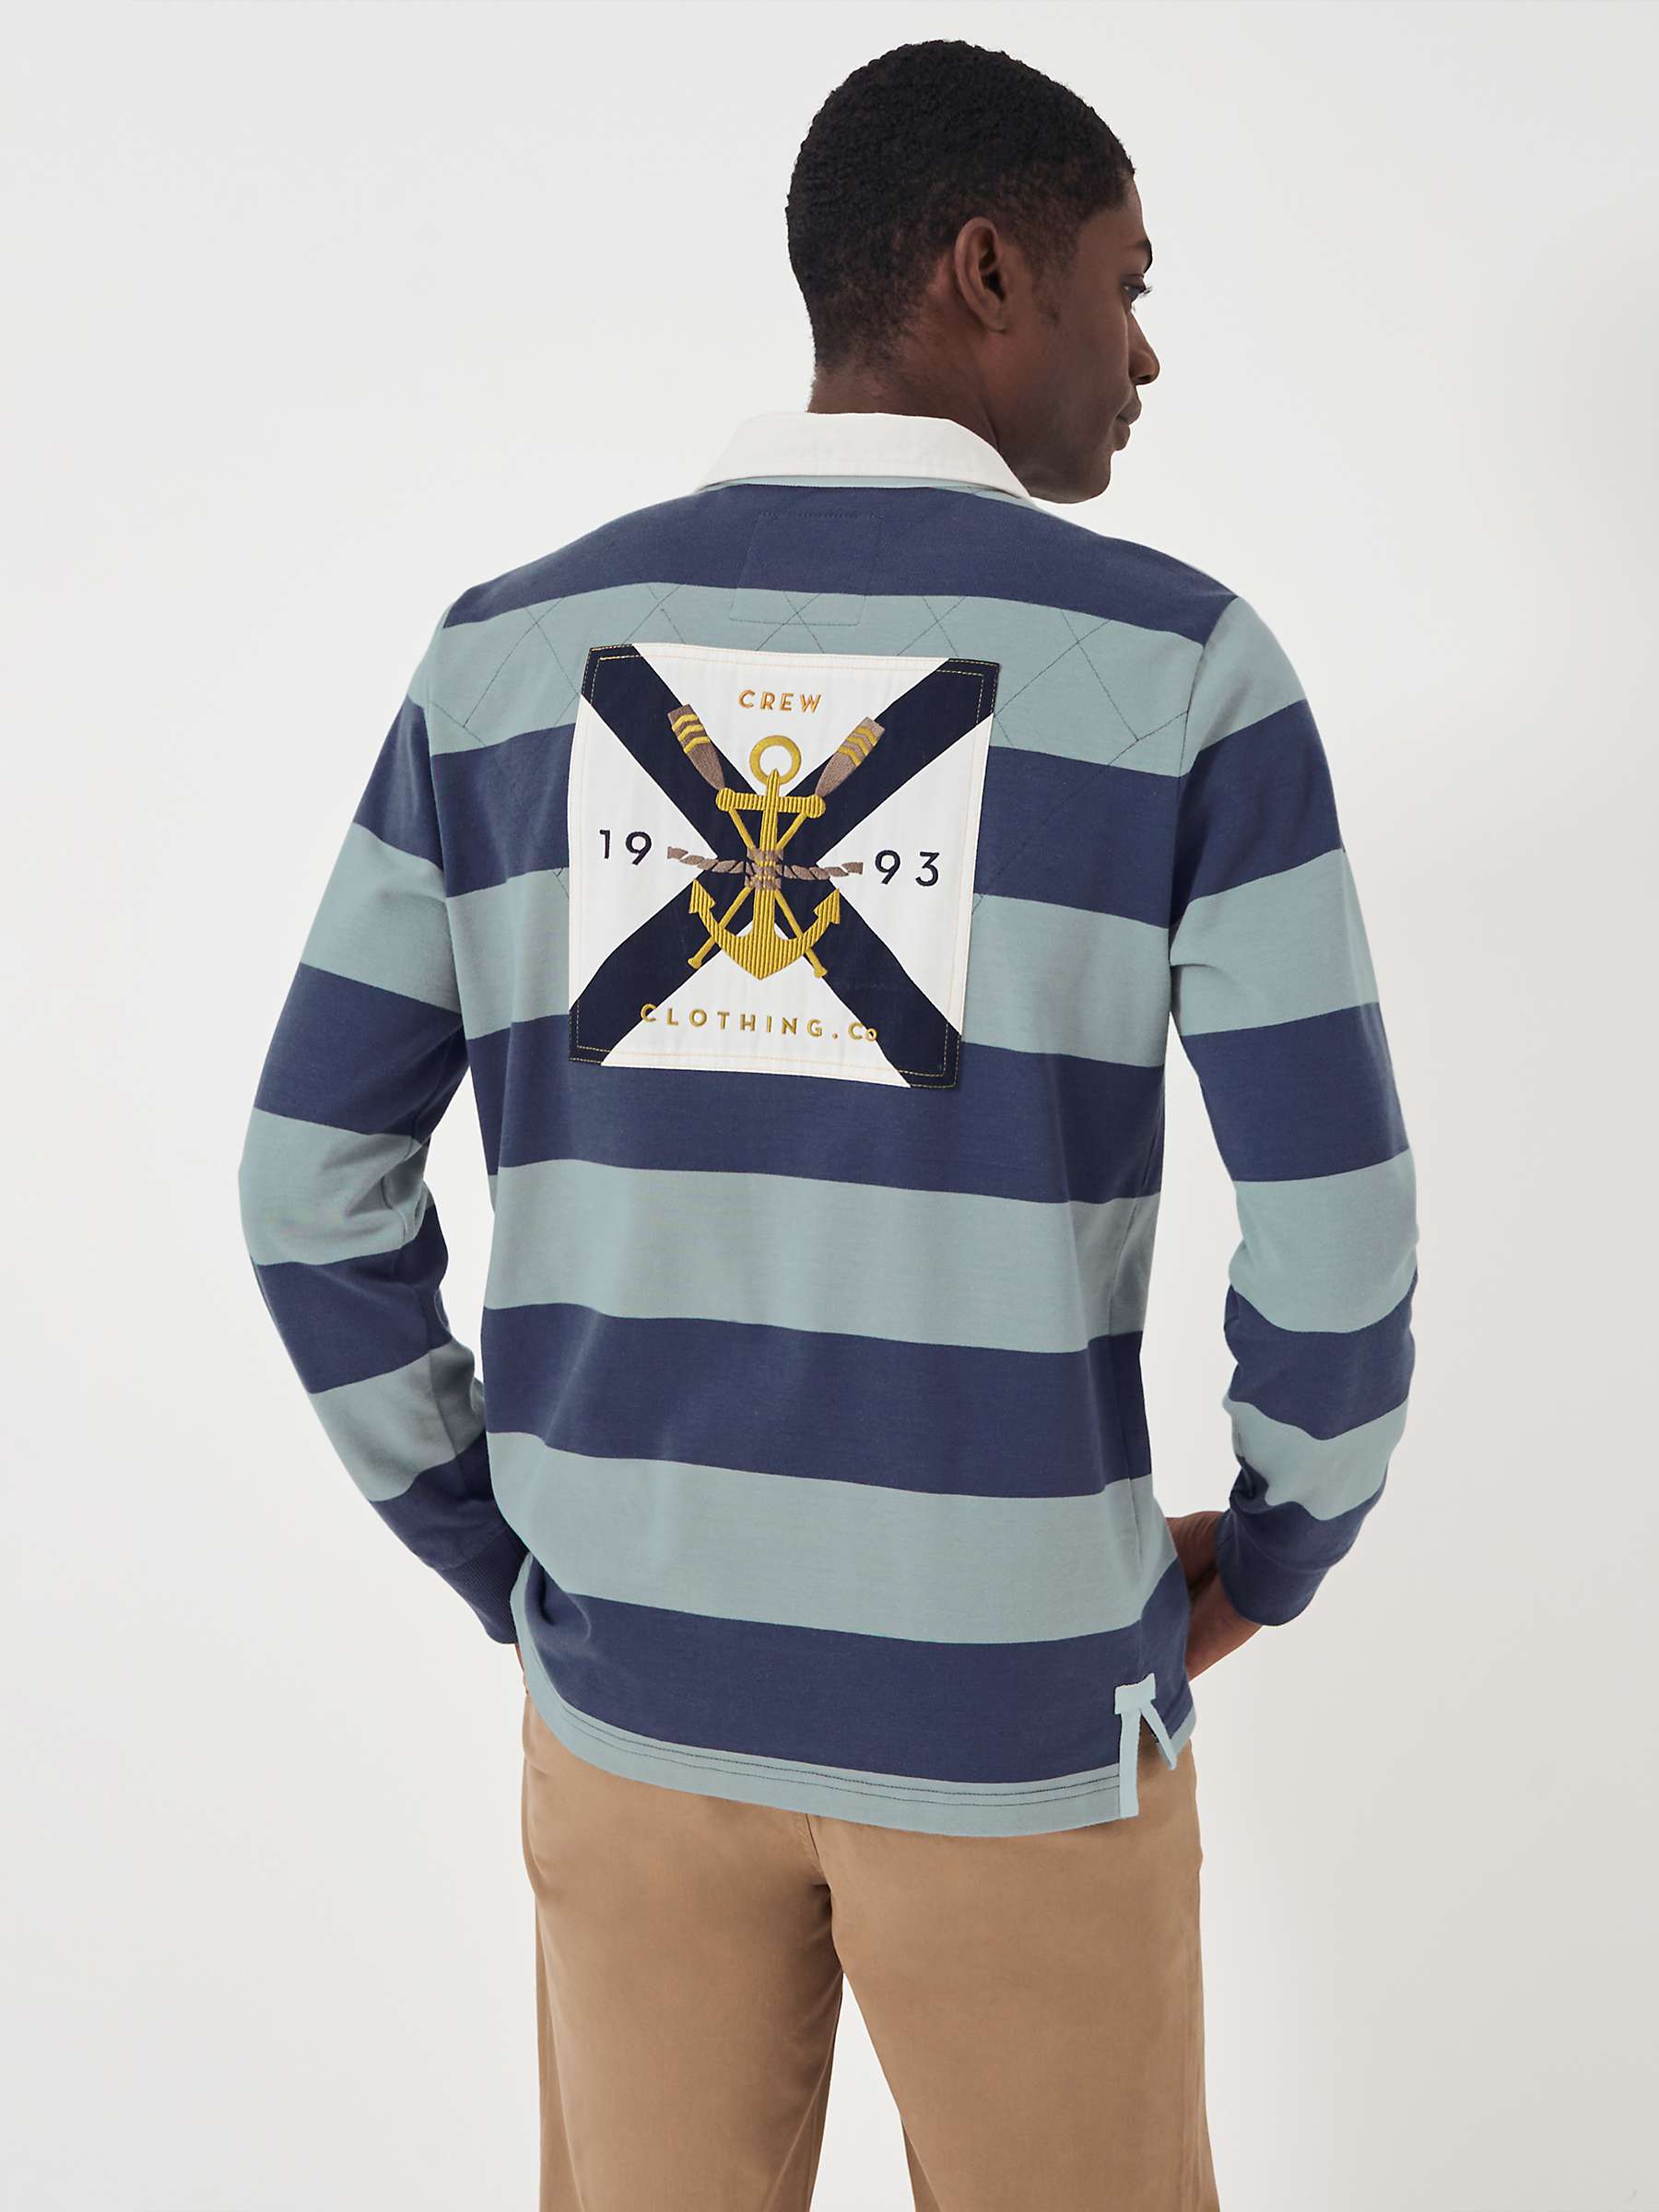 Buy Crew Clothing Callington Rugby Top Online at johnlewis.com